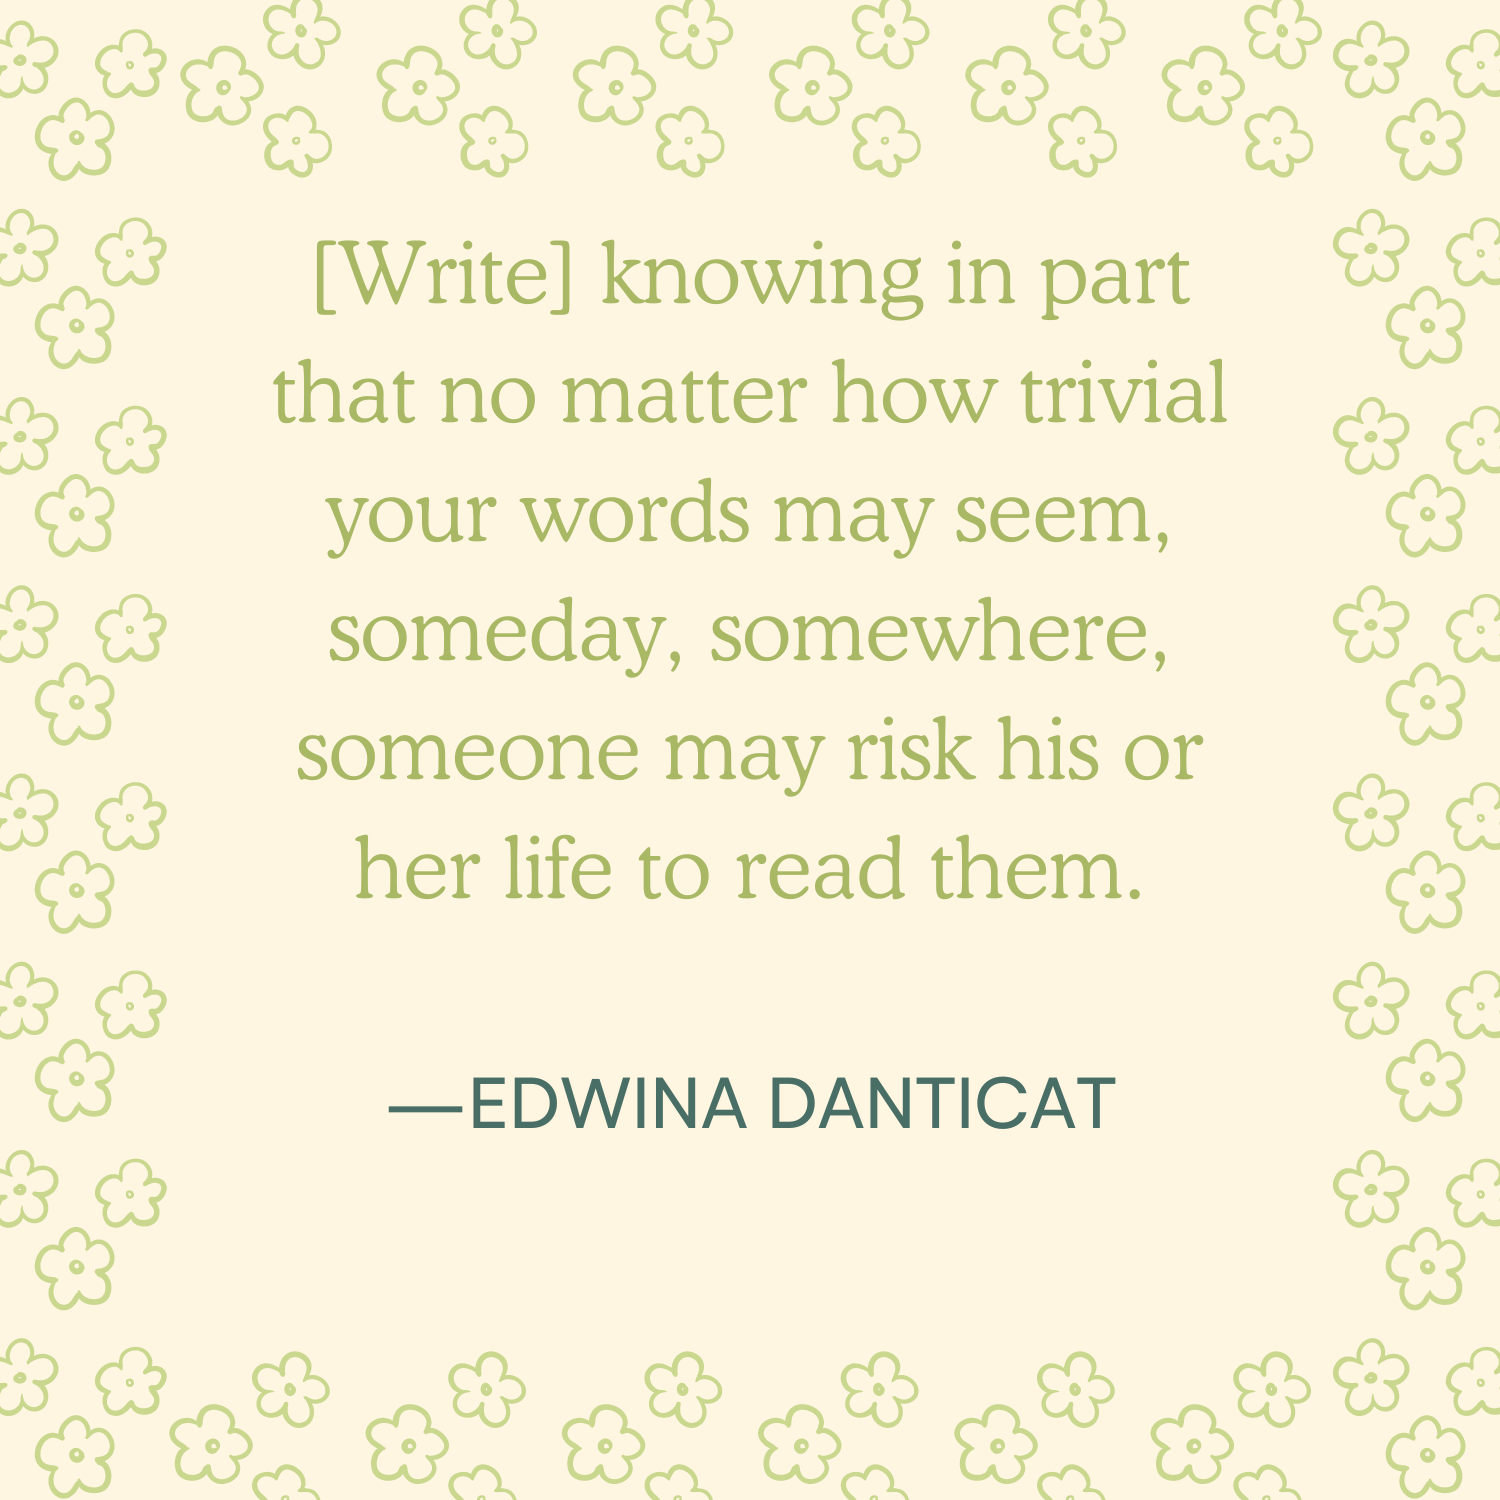 <p>"[Write] knowing in part that no matter how trivial your words may seem someday, somewhere, someone may risk his or her life to read them." —Edwina Danticat </p>